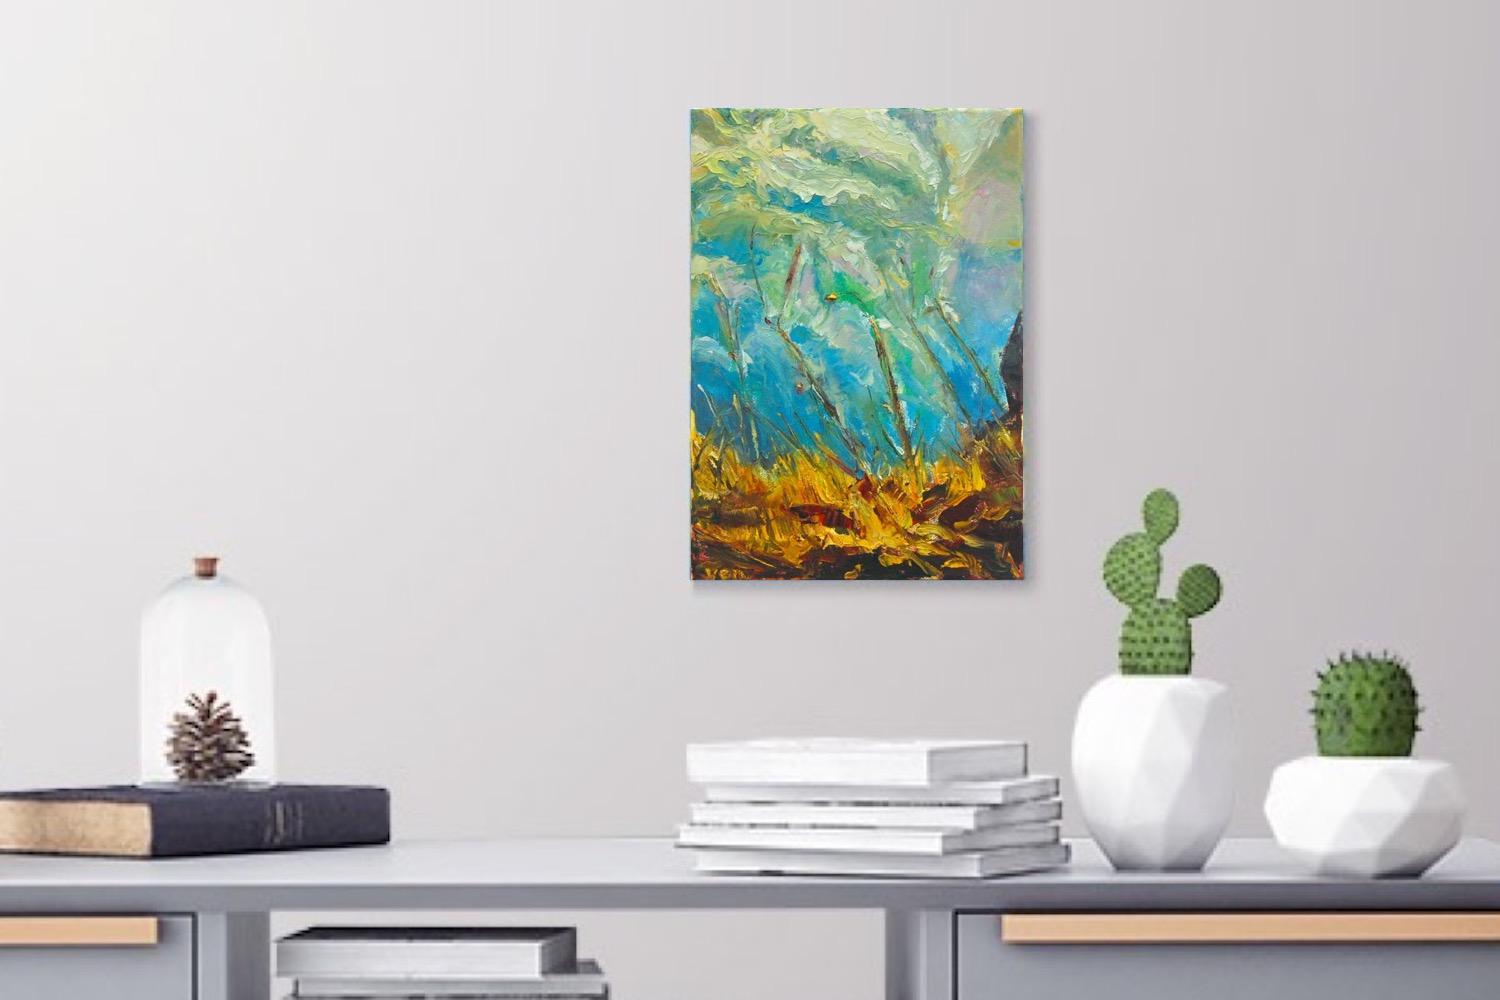 Unbending - Impressionist Abstract Oil Painting of Icelandic autumn nature scenery, original impasto fine art with water and clouds in wind